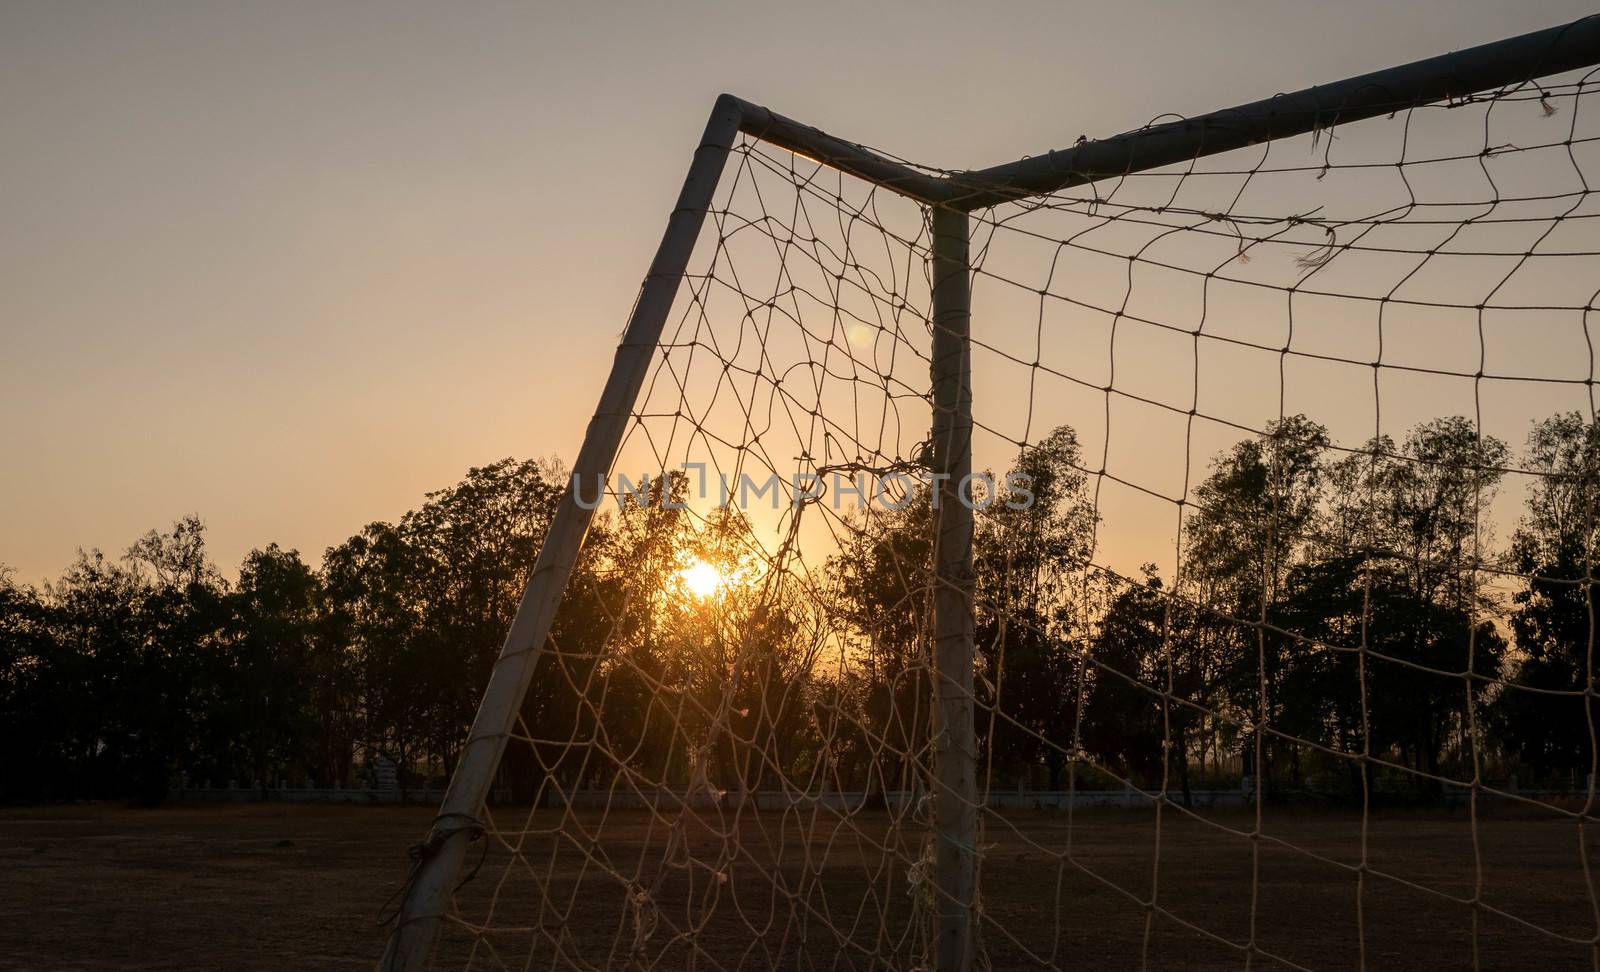 Football goal with sunset light background in the public stadium.